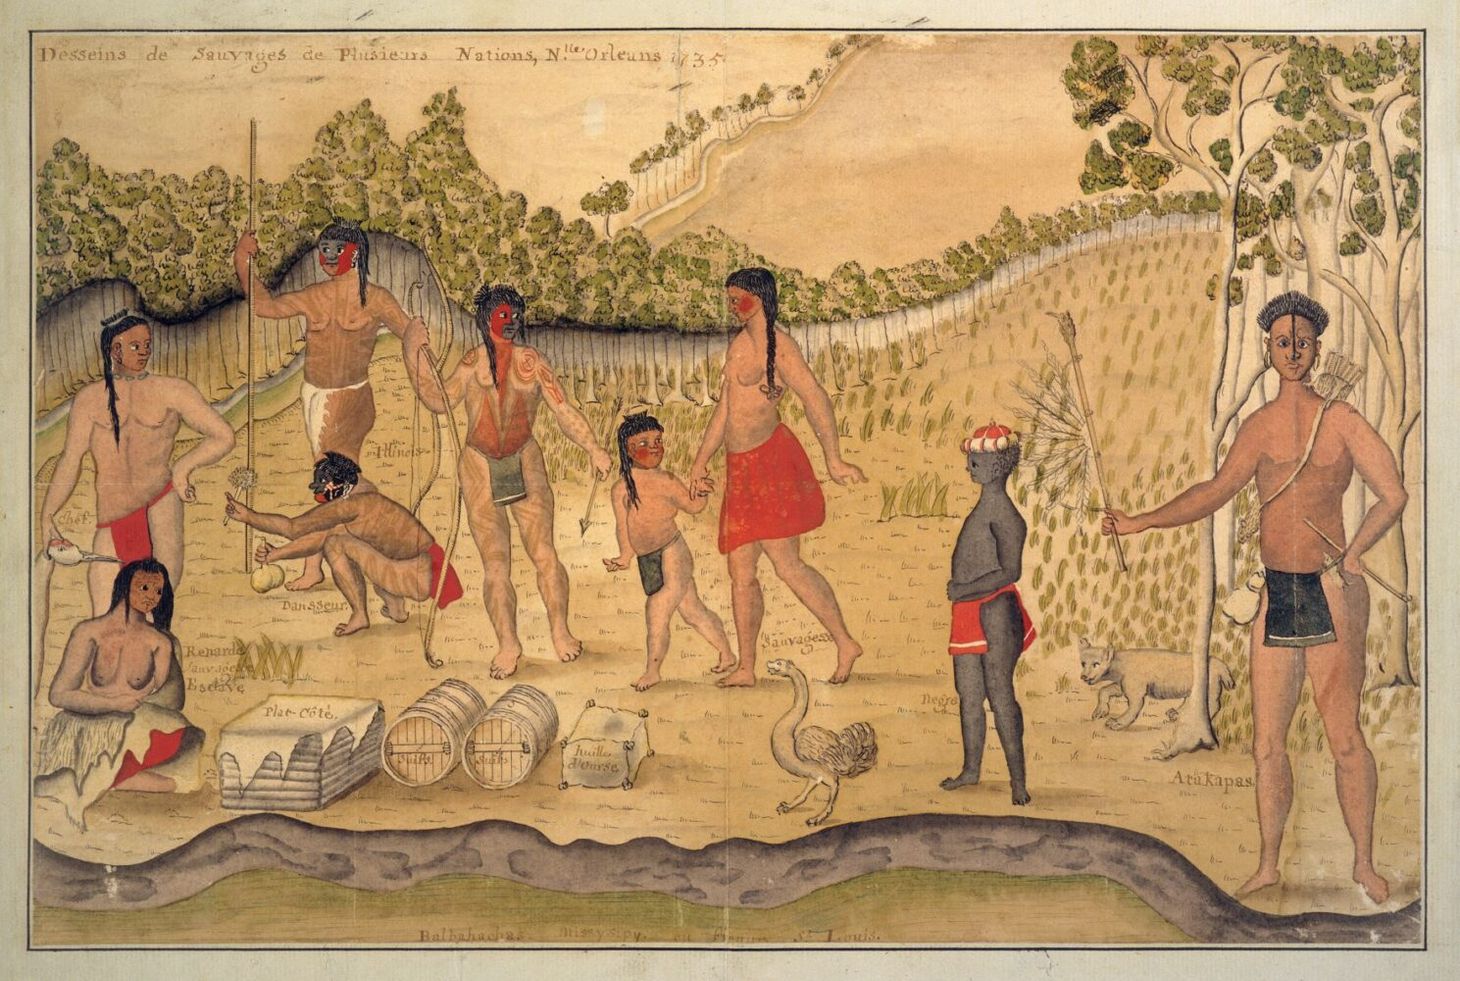 “You Glory in Our Old Rags”: Indigenous Americans and the Fur Trade in Northern America, c.1600 - c.1800